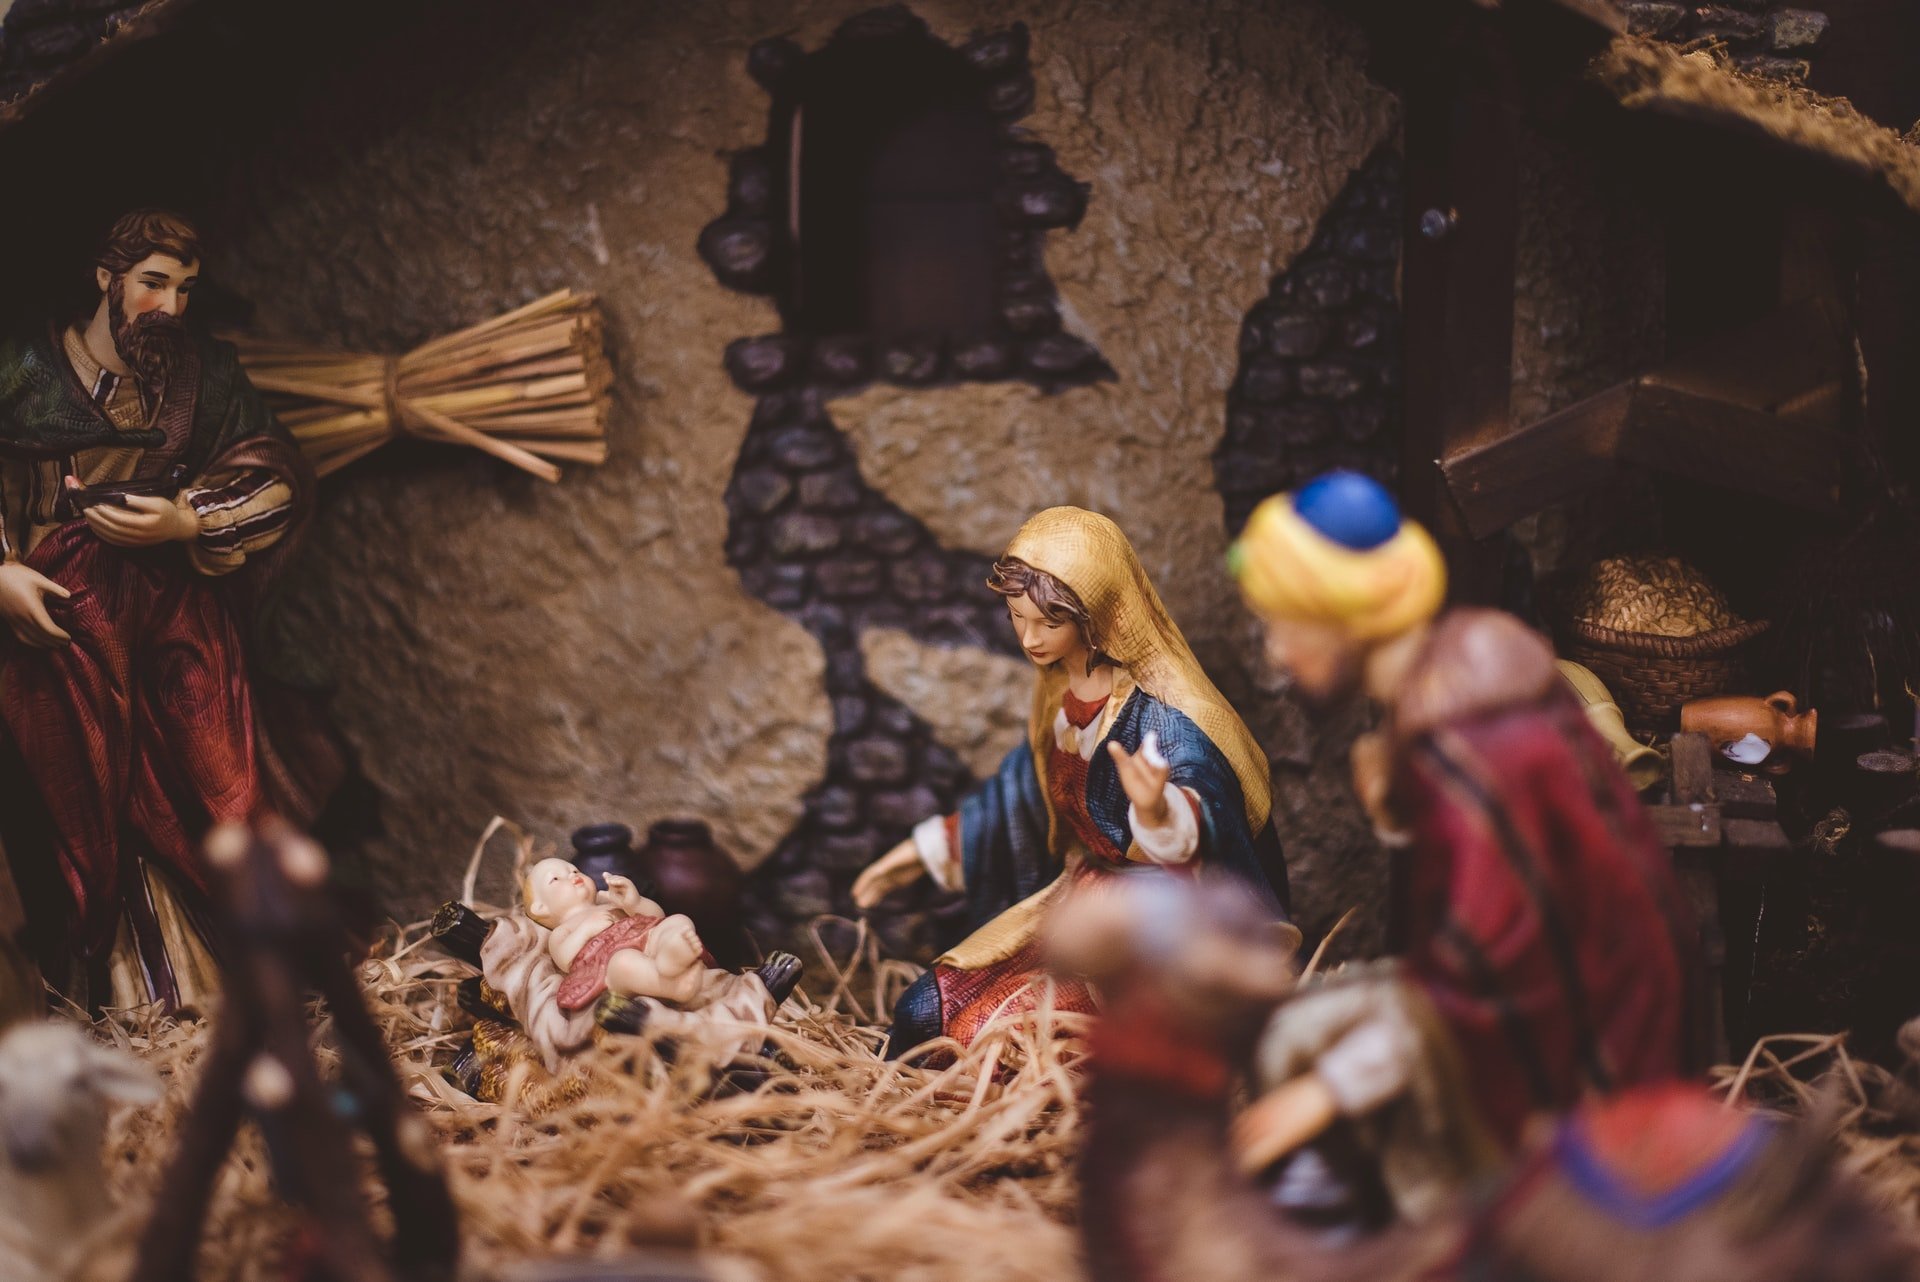 A set of statues depicting the birth of Jesus Christ.